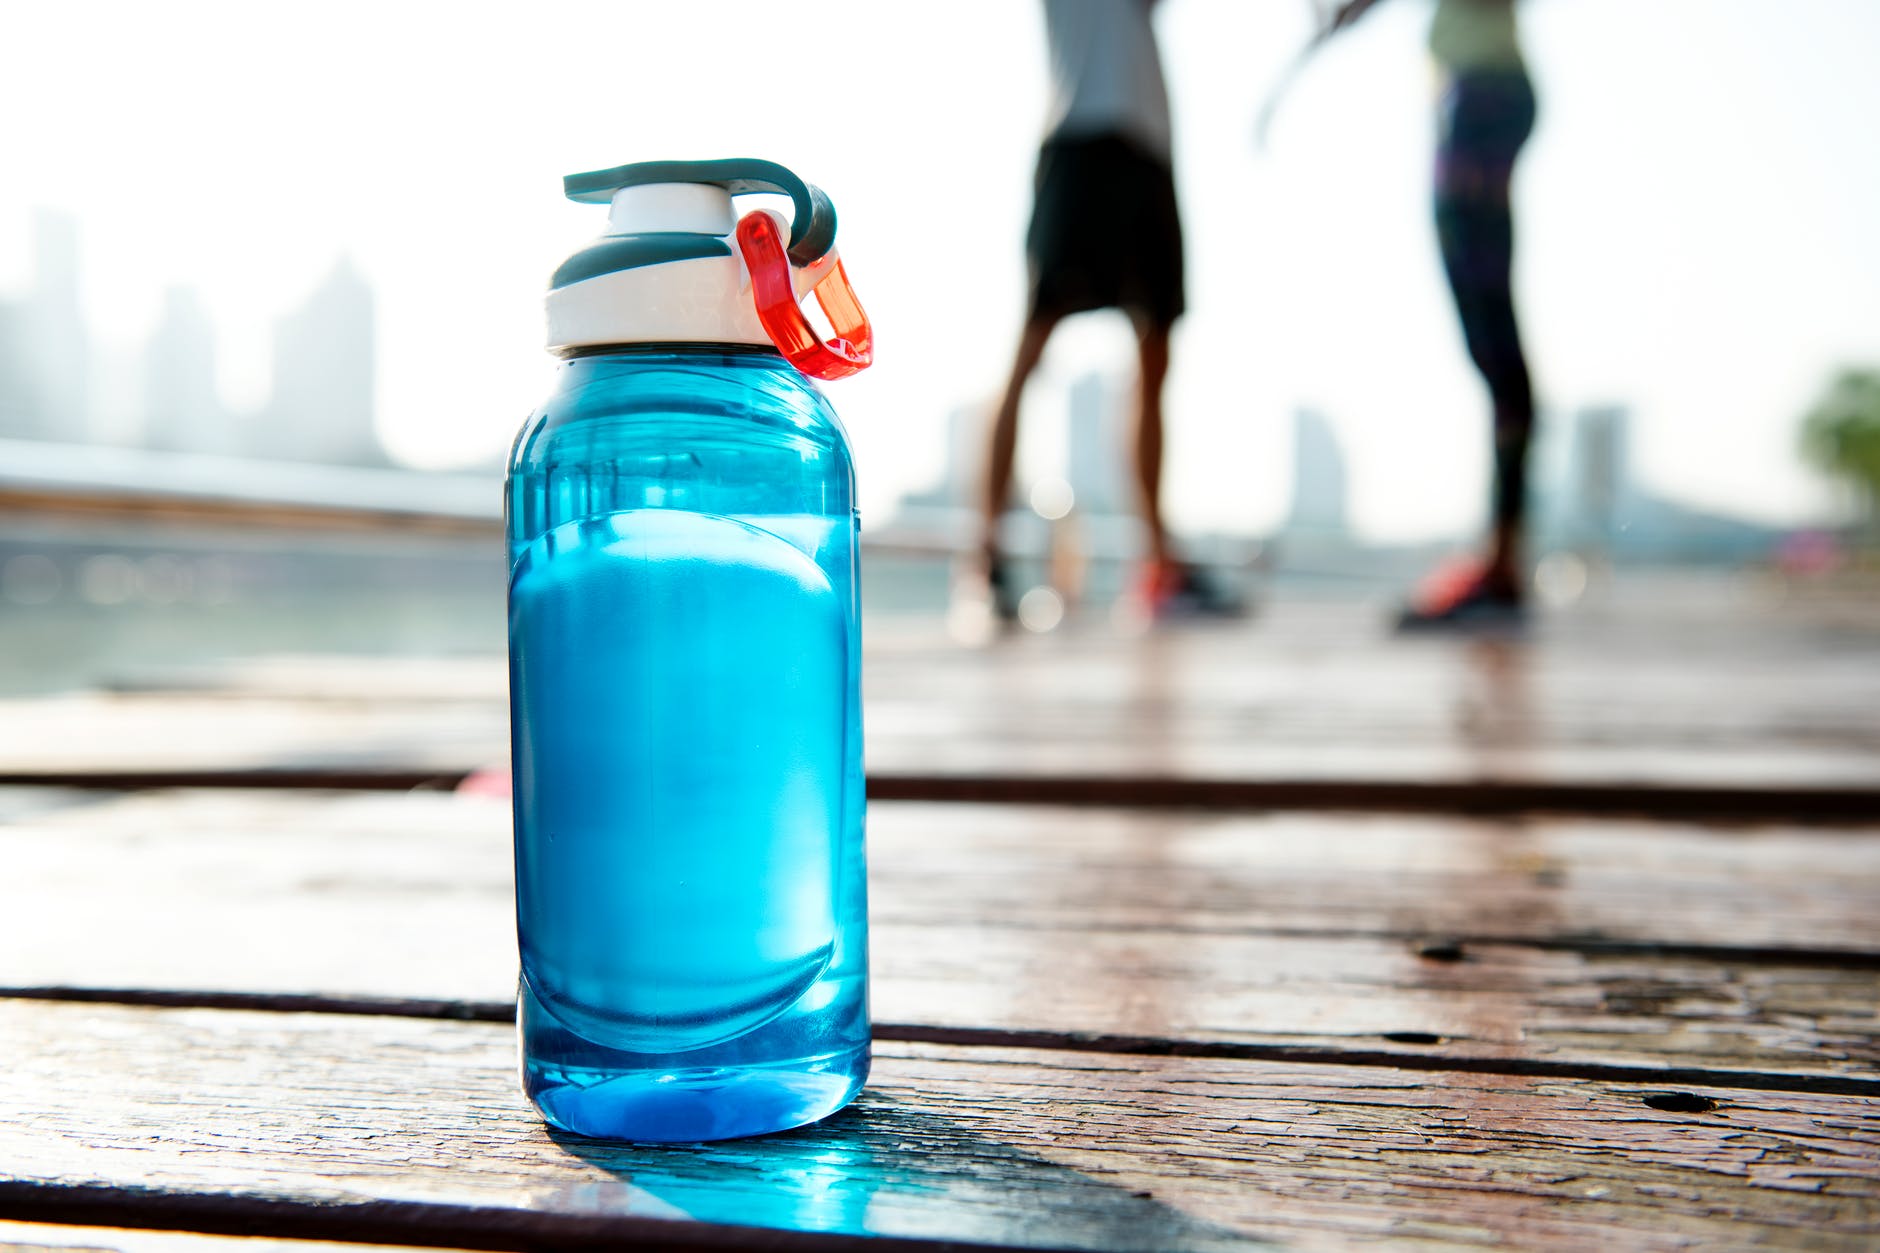 A water bottle with two runners in the background. Photo by: Pexels.com